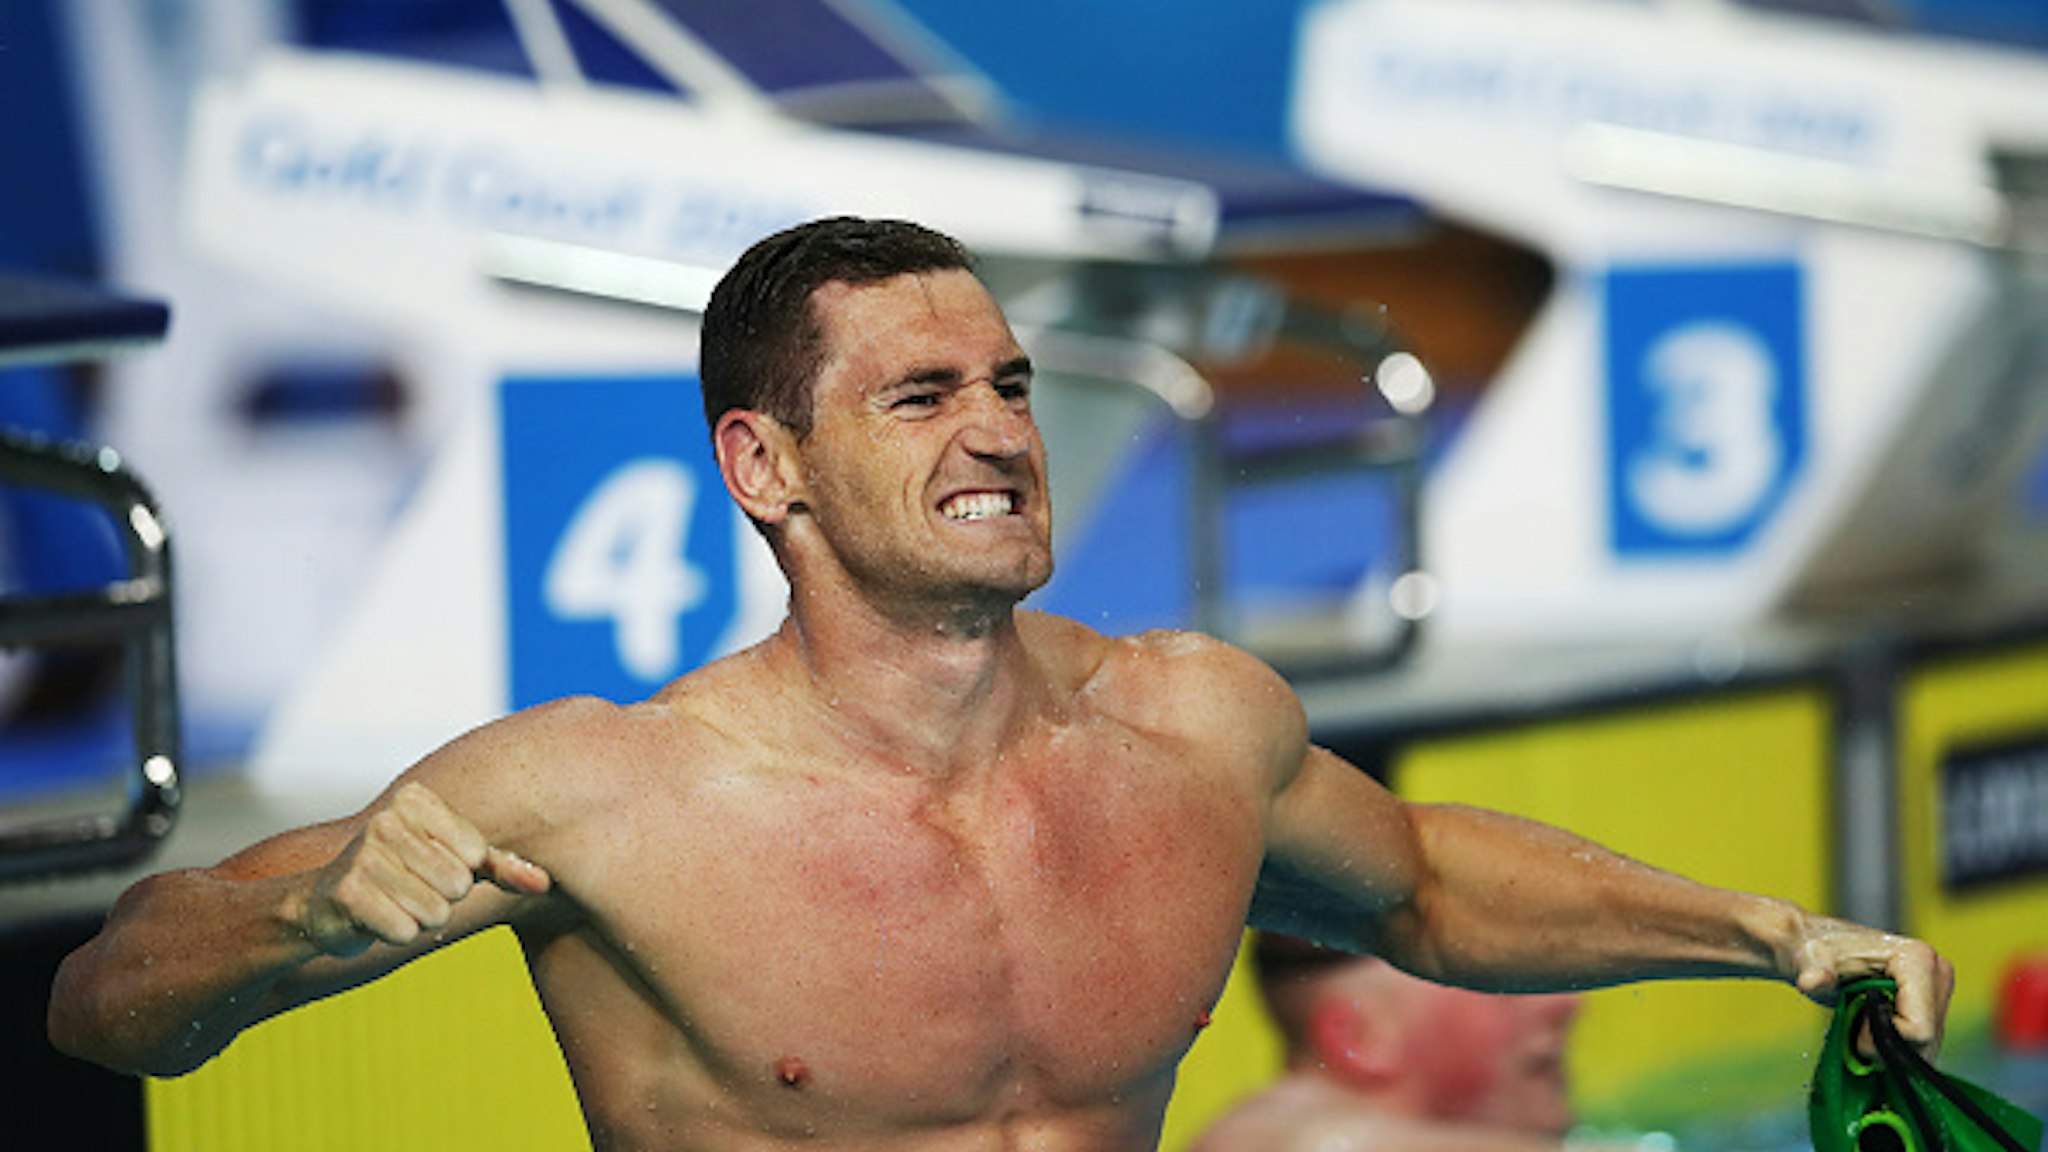 GOLD COAST, AUSTRALIA - APRIL 09: Cameron van der Burgh of South Africa celebrates after winning the Men's 100m Breaststroke on day five of the Gold Coast 2018 Commonwealth Games at Optus Aquatic Centre on April 9, 2018 on the Gold Coast, Australia.